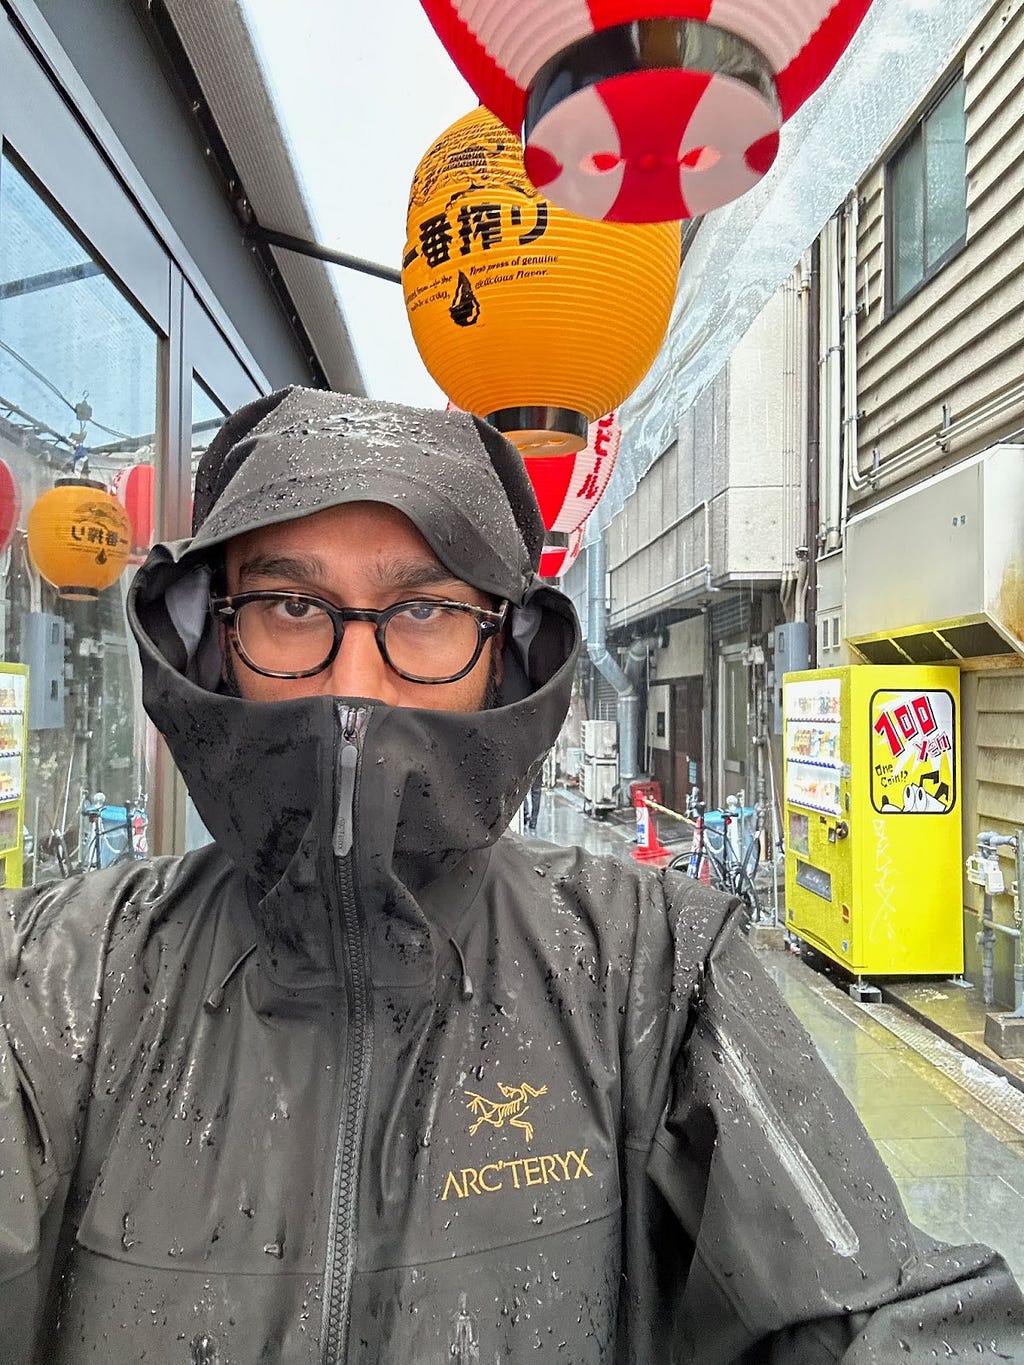 Selfie of brown man with glasses standing in rain in an Arc’teryx outer shell with hood drawn up. Japanese signs, lanterns and vending machine in the background. Wet street.